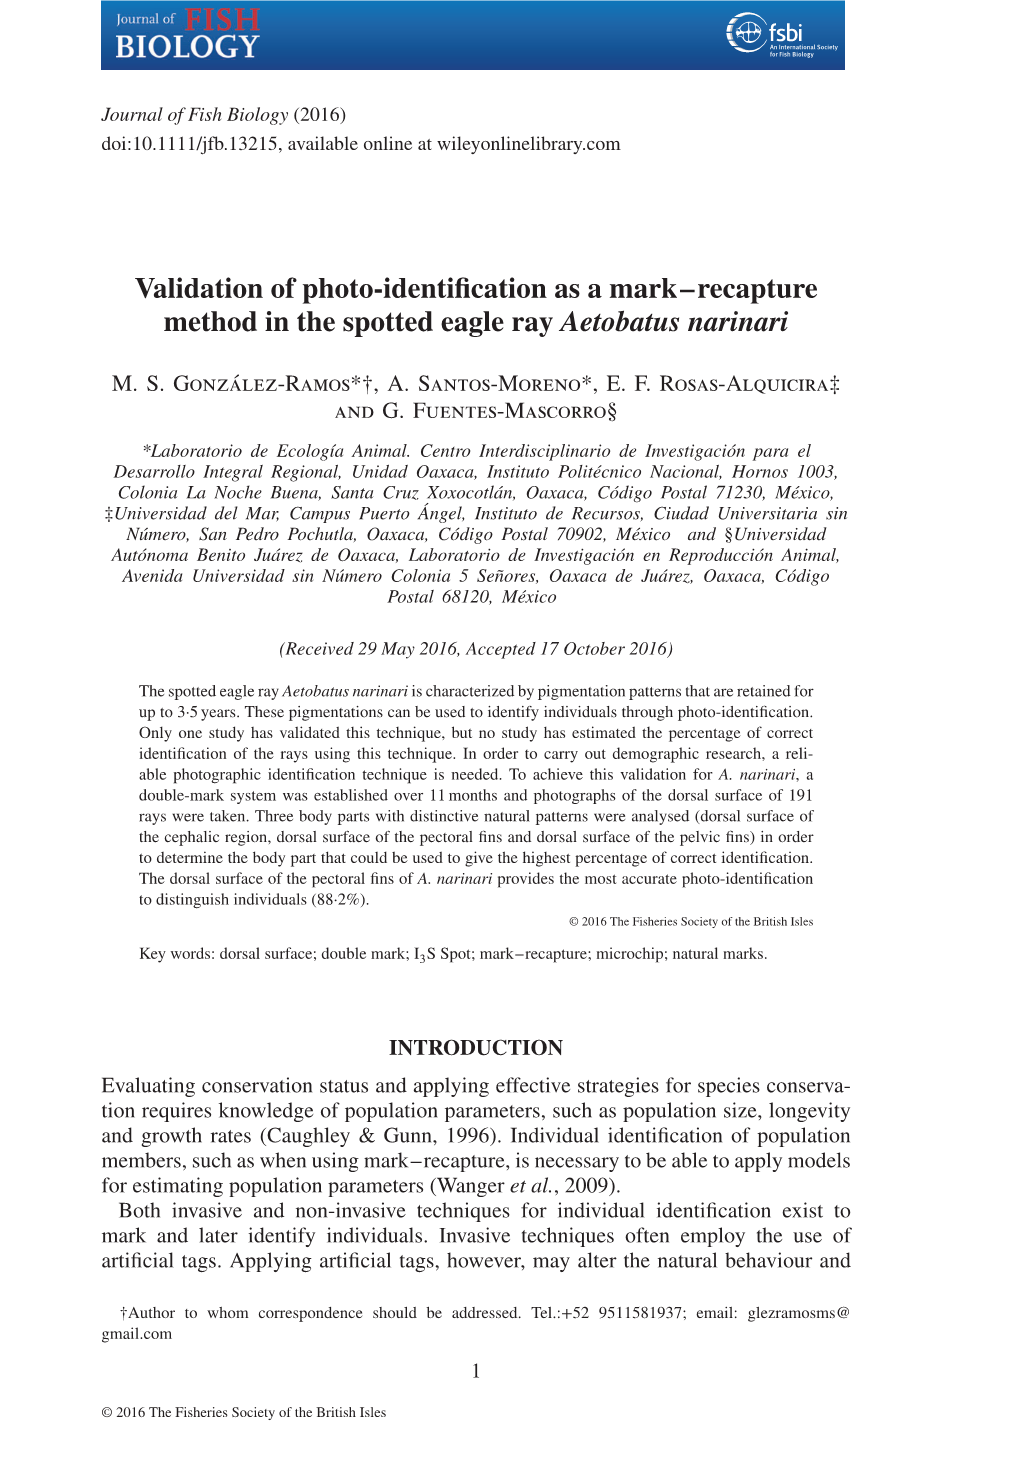 Validation of Photo-Identification As a Mark--Recapture Method in The